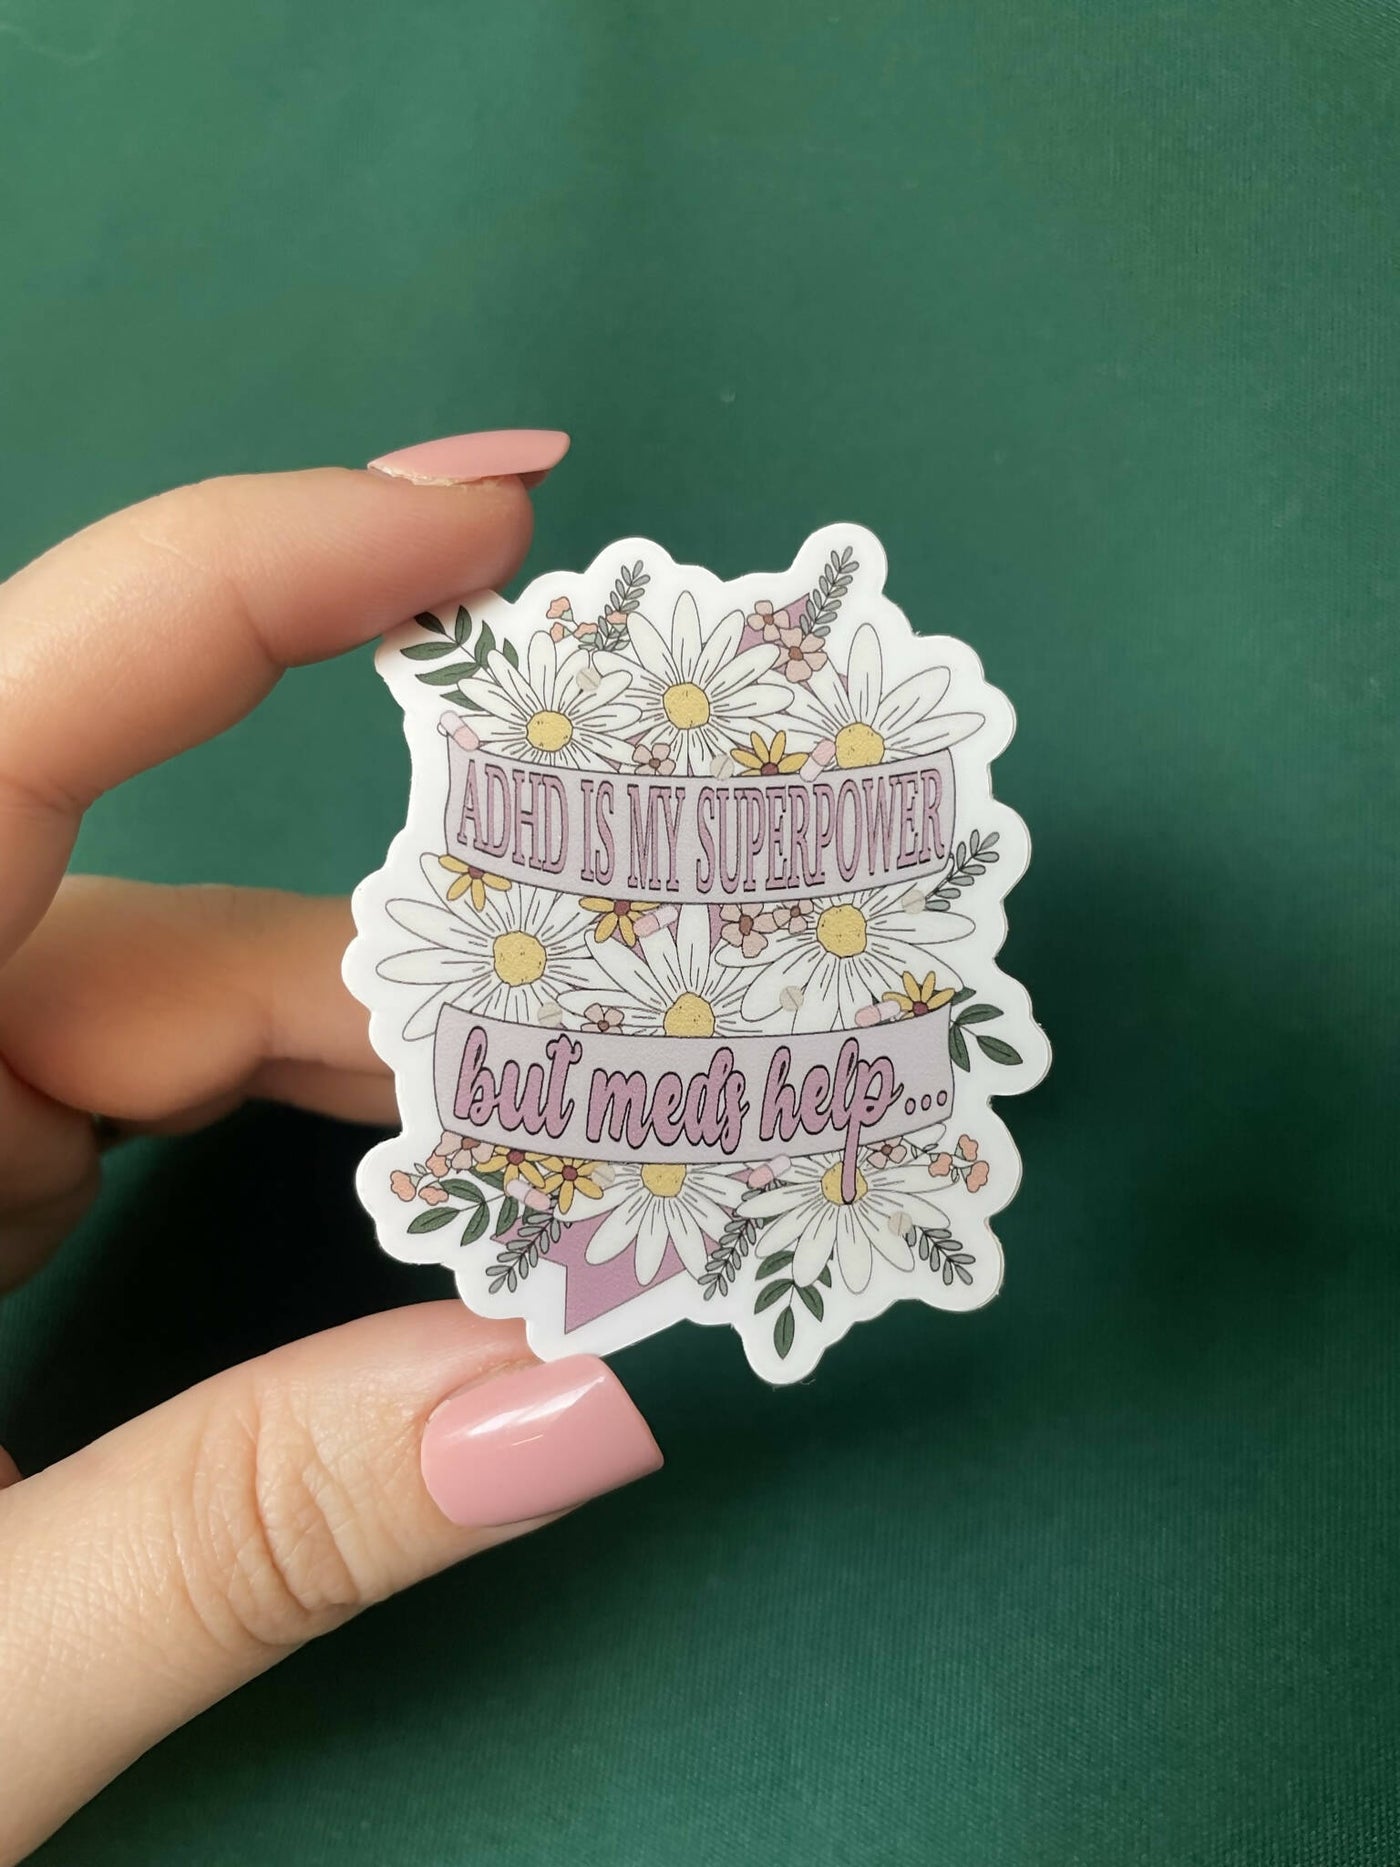 ADHD is my Super Power Floral Sticker